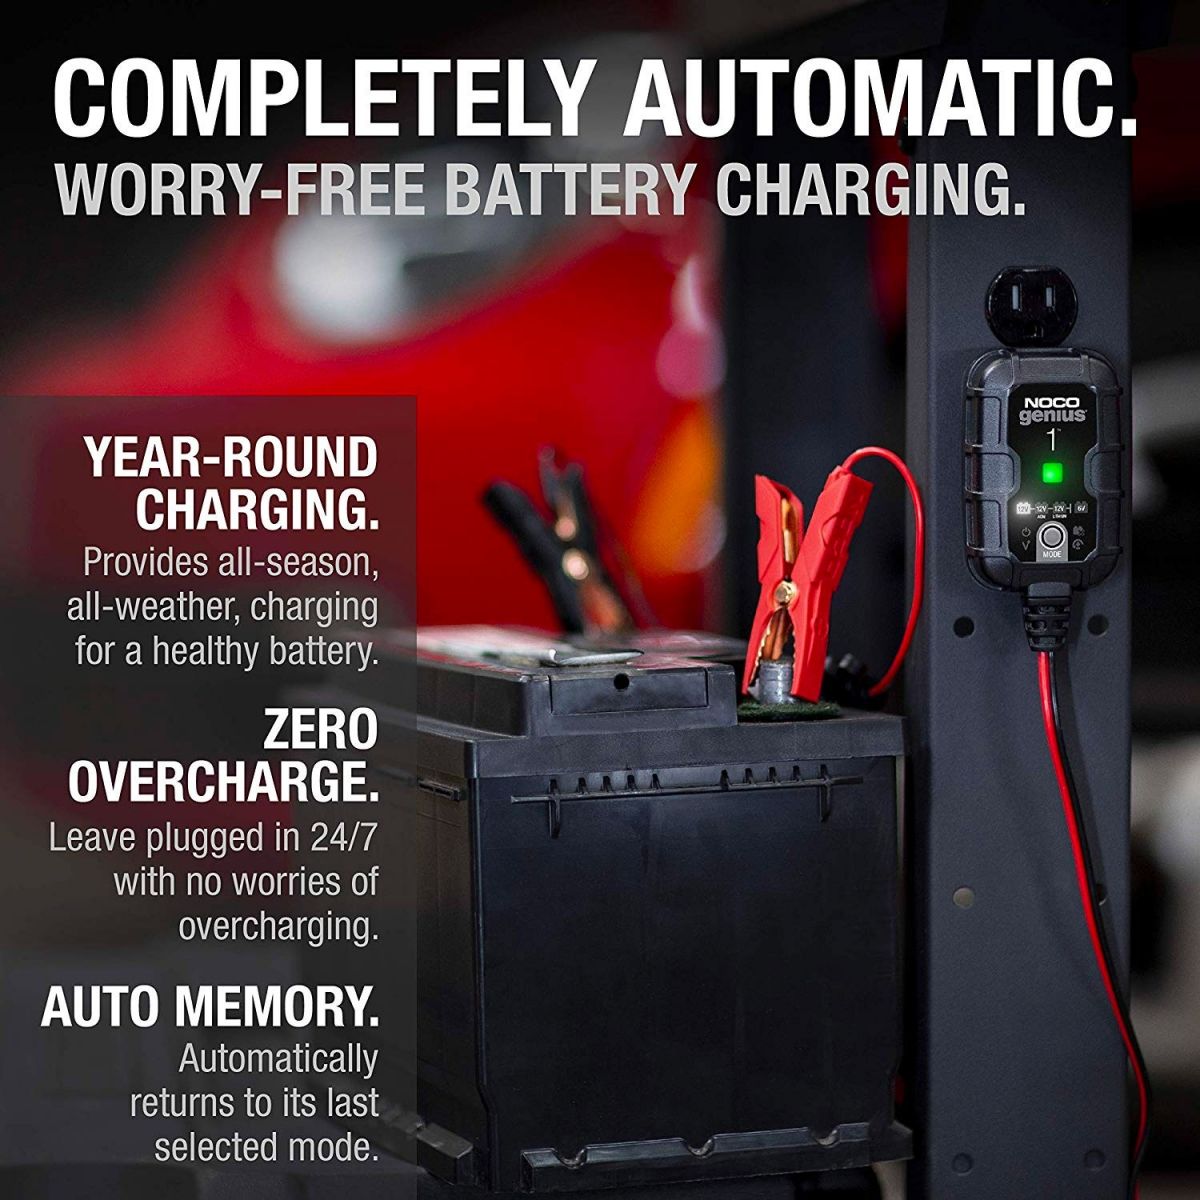 Noco Genius1 1 Amp Battery Charger, Maintainer, and Desulfator